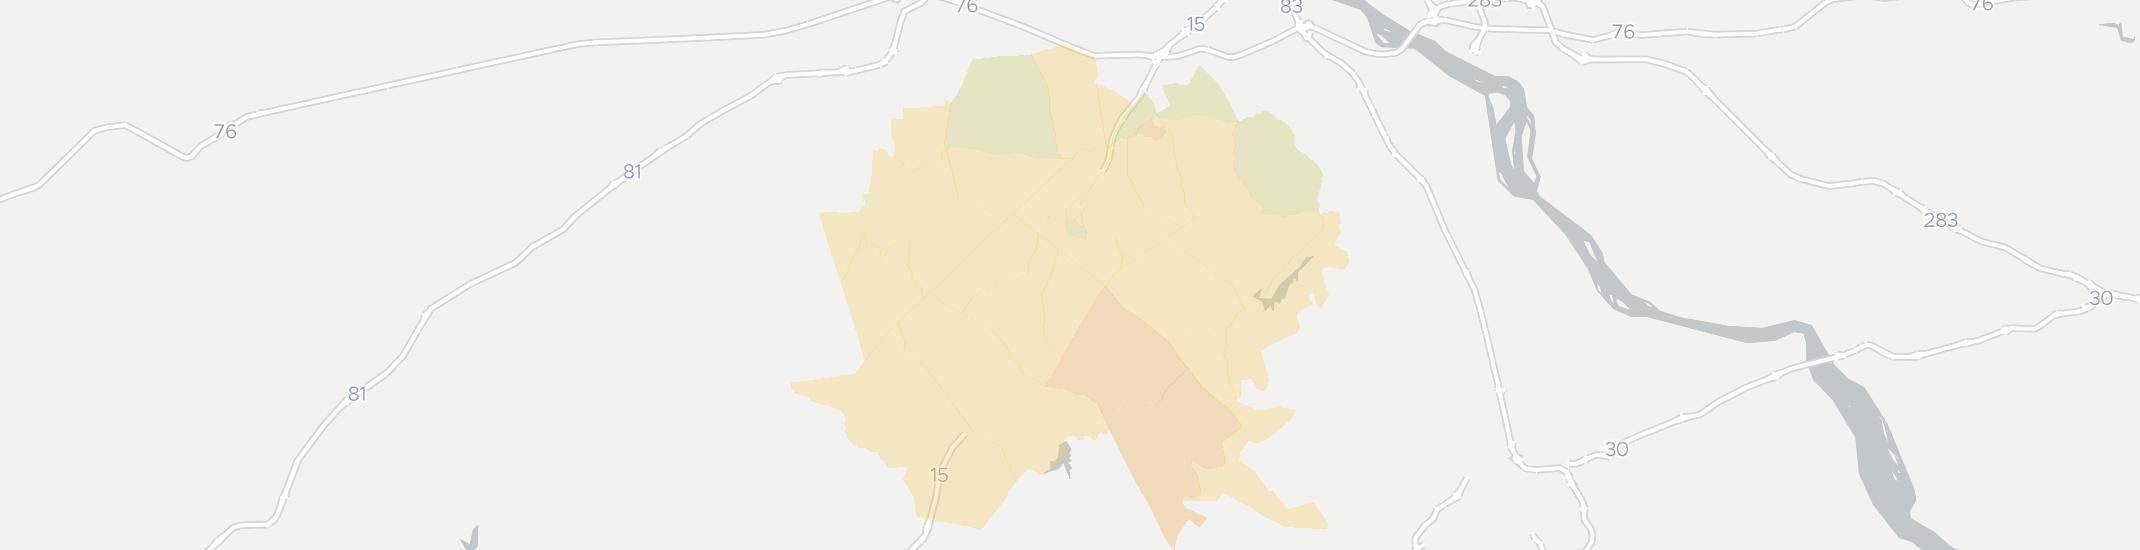 Dillsburg Internet Competition Map. Click for interactive map.